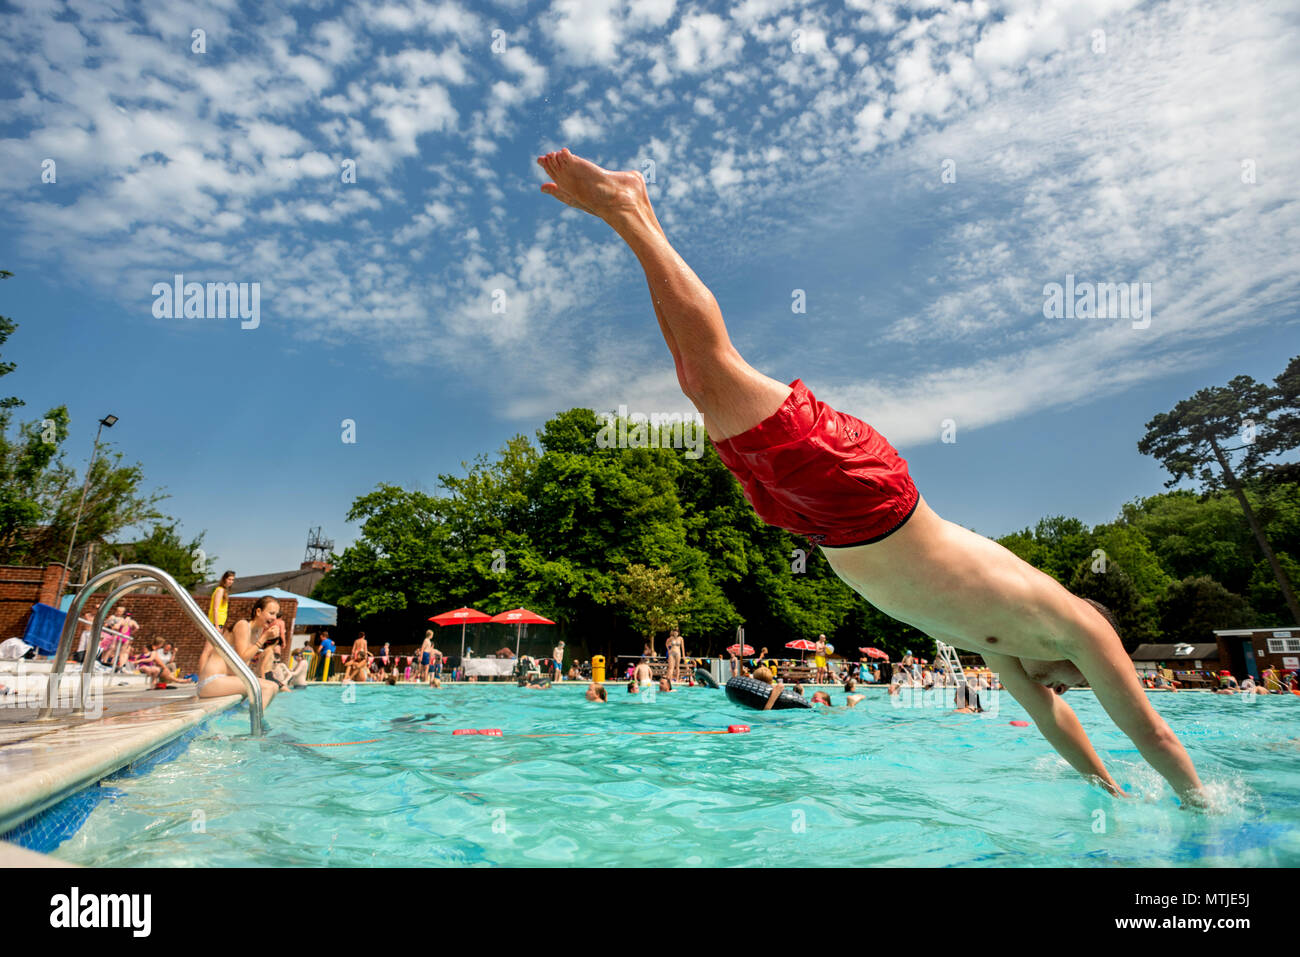 Pell's Pool in Lewes, East Sussex, the oldest documented freshwater outdoor public swimming pool in the UK, opening for the summer season Stock Photo